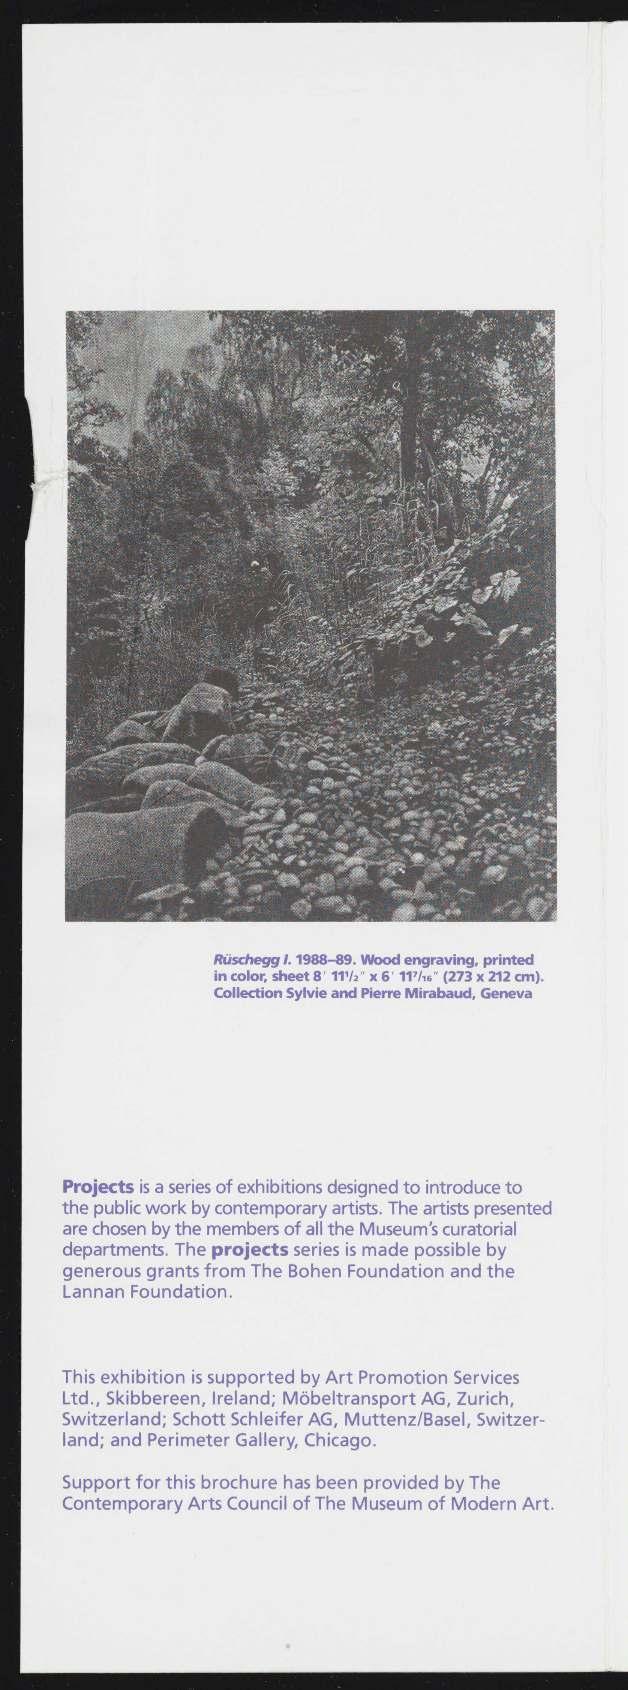 7/is Ruschegg 1.1988-89. Wood engraving, printed in color, sheet 8 HV2" x 6 11 (273 x 212 cm).